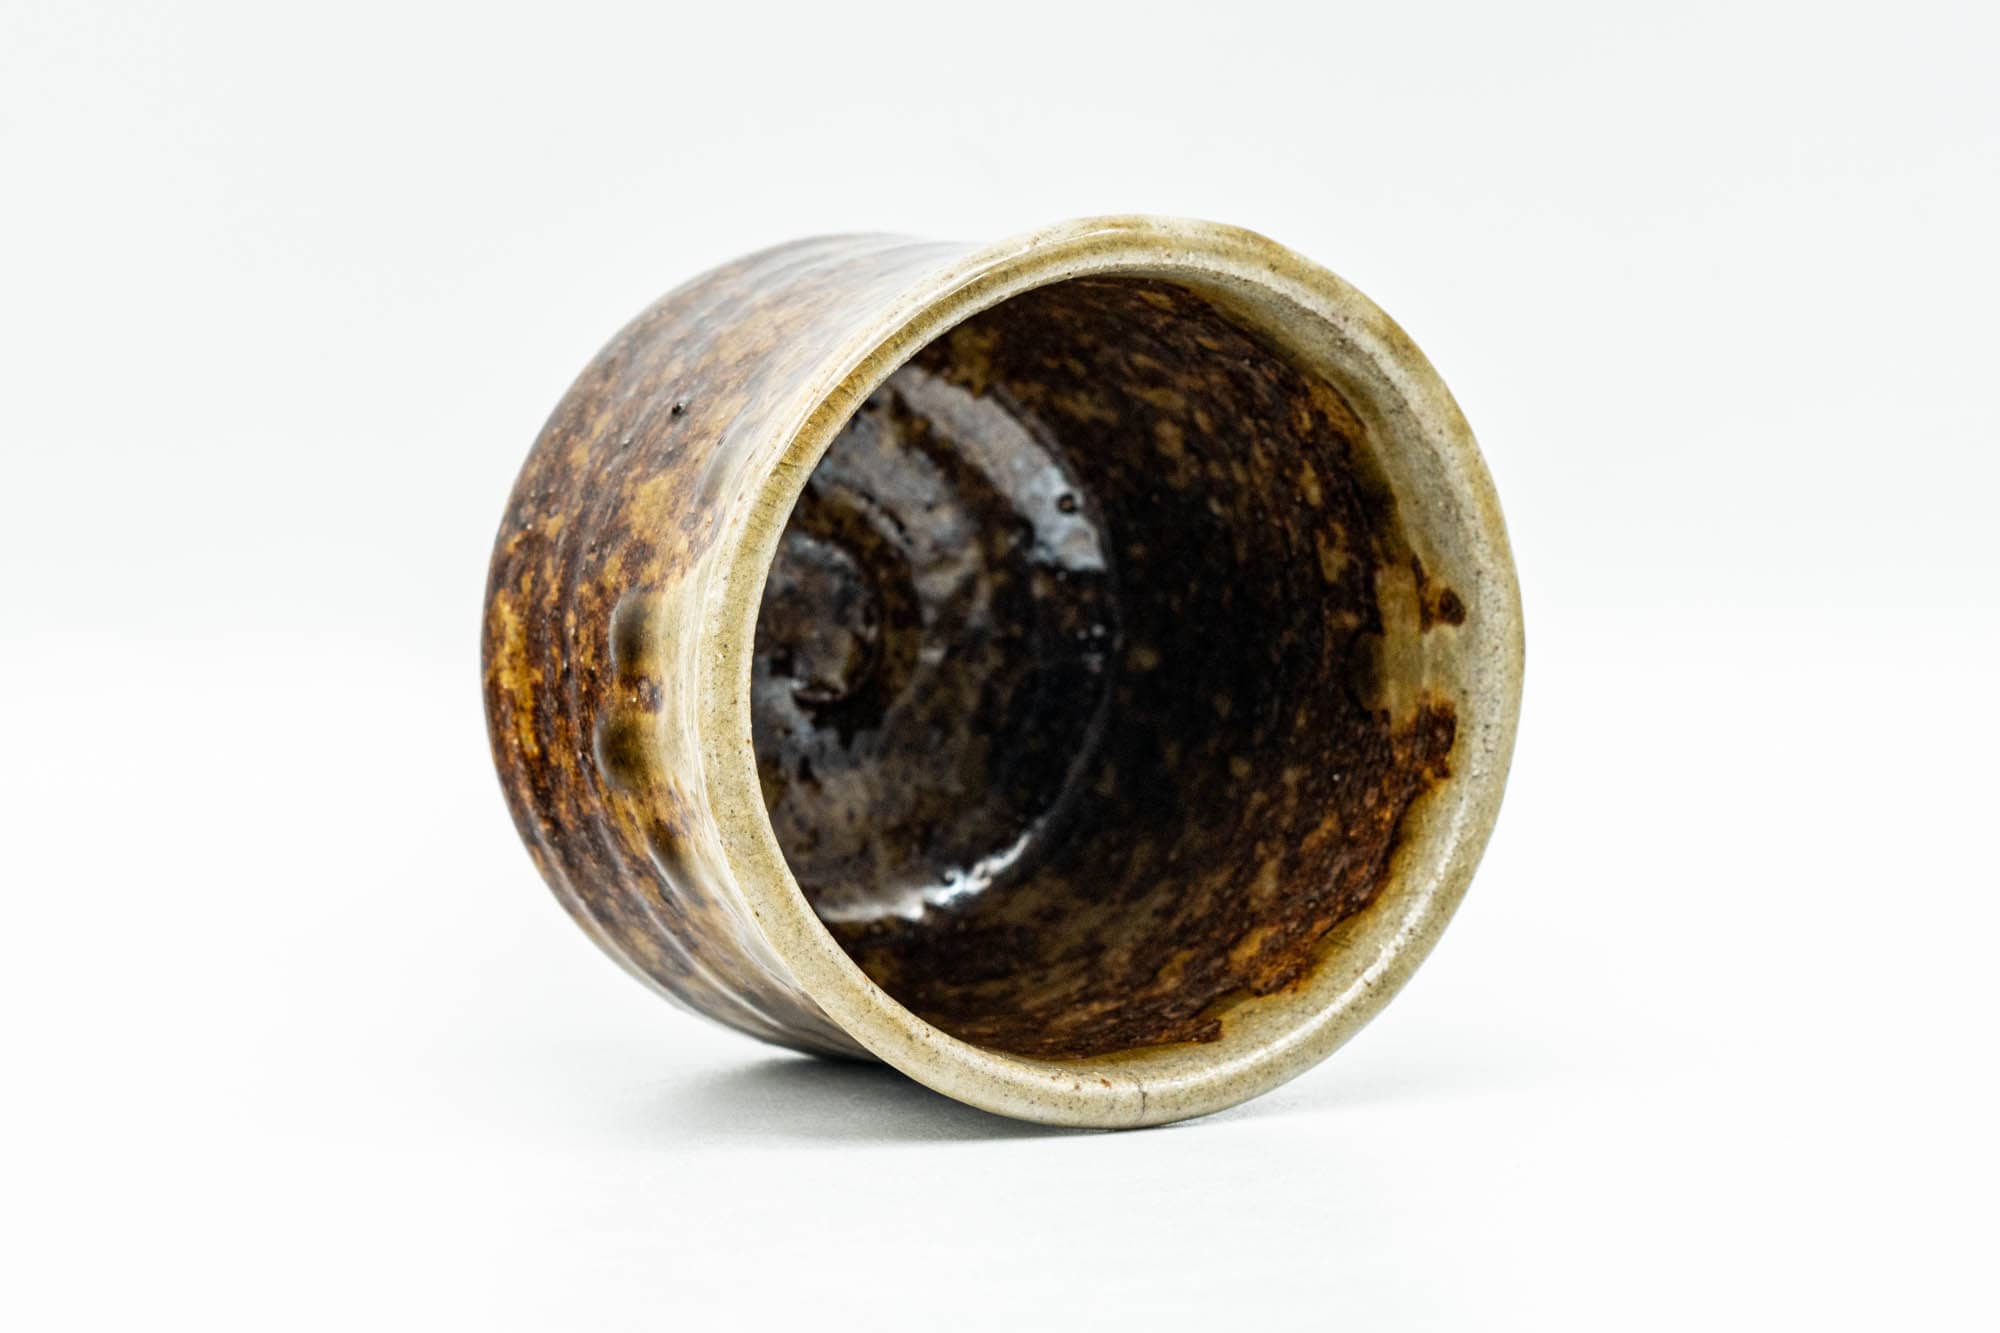 Japanese Teacup - Earthy Brown and Green Drip-Glazed Yunomi - 90ml